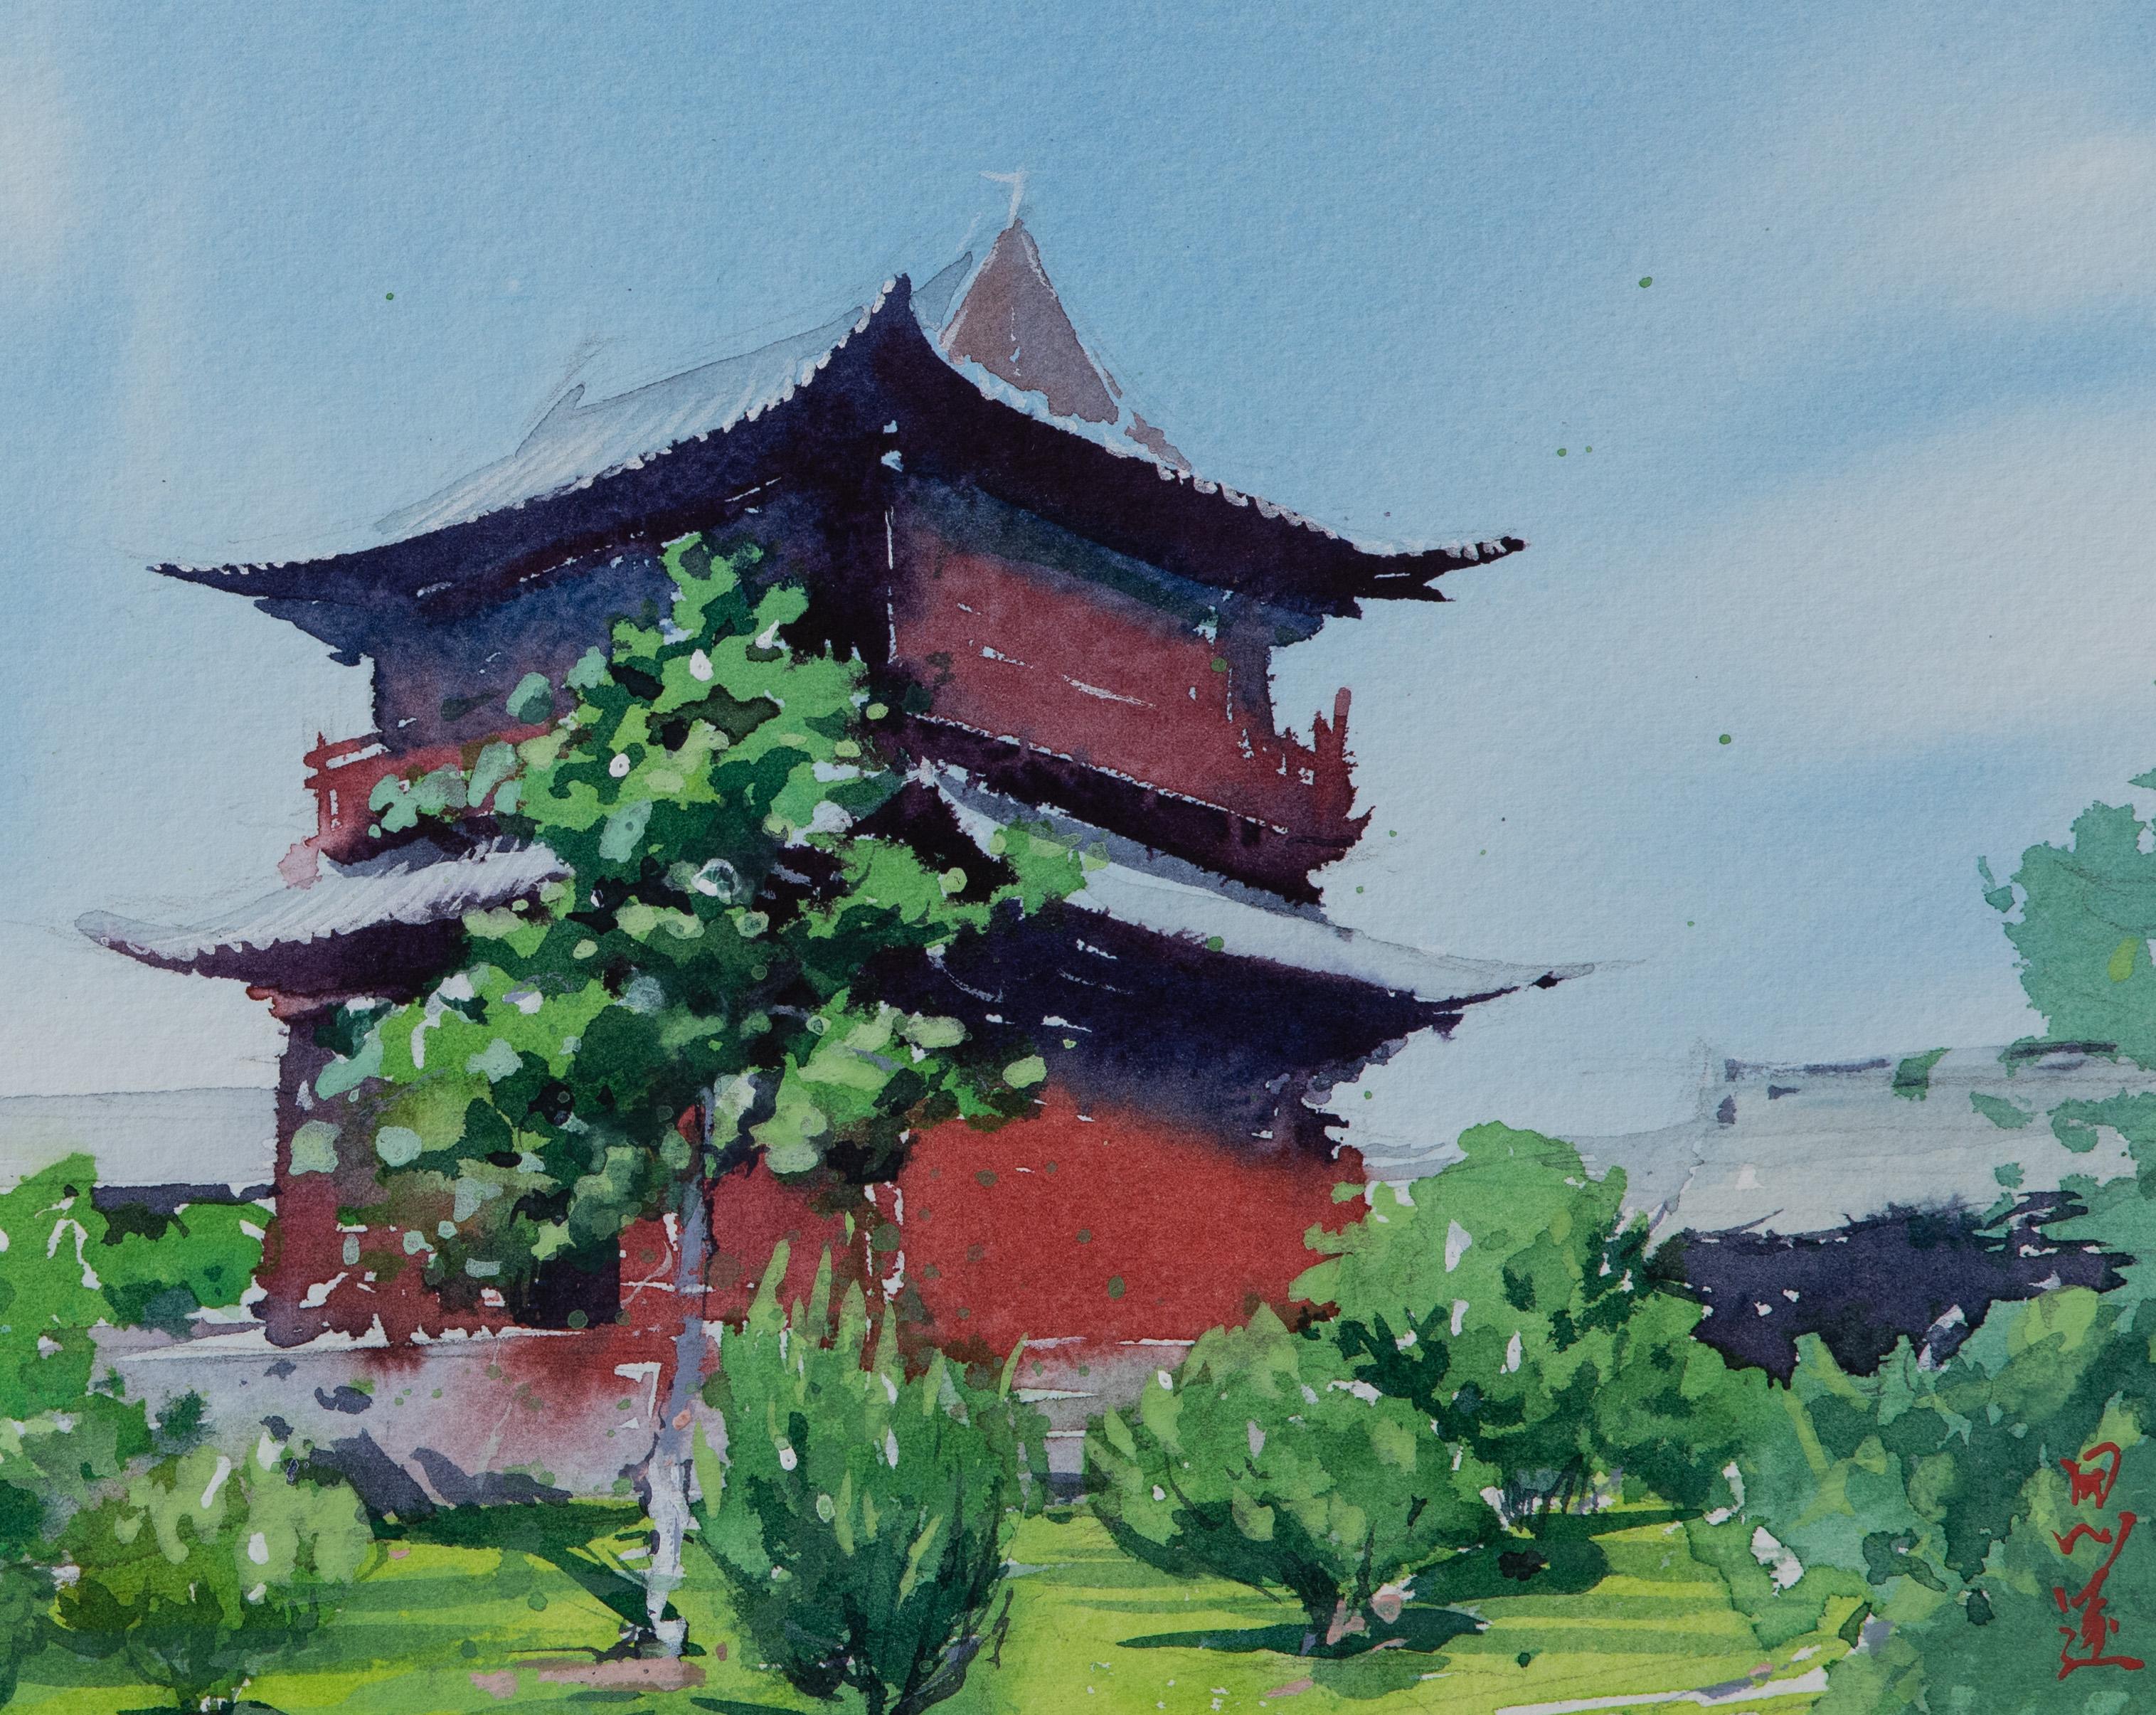 Watercolor Impressions of Chinese Architecture 7, Original Painting - Impressionist Art by Siyuan Ma